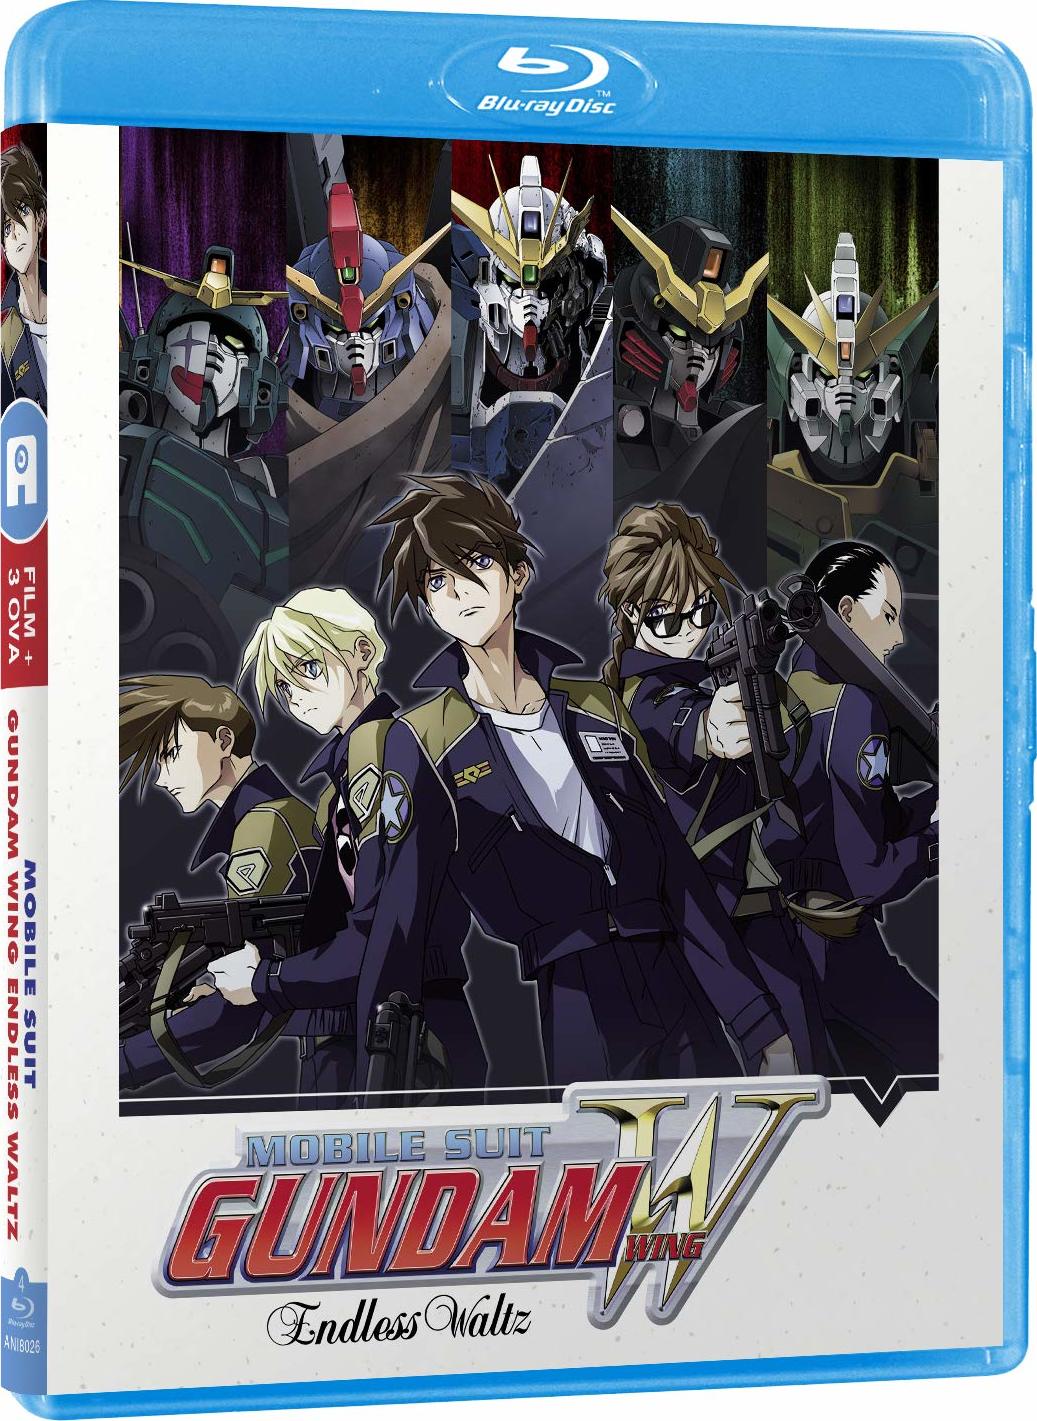 Mobile Suit Gundam Wing The Movie Endless Waltz Blu Ray Release Date May 11 2020 Includes Film And 3 Ova Collector S Edition United Kingdom